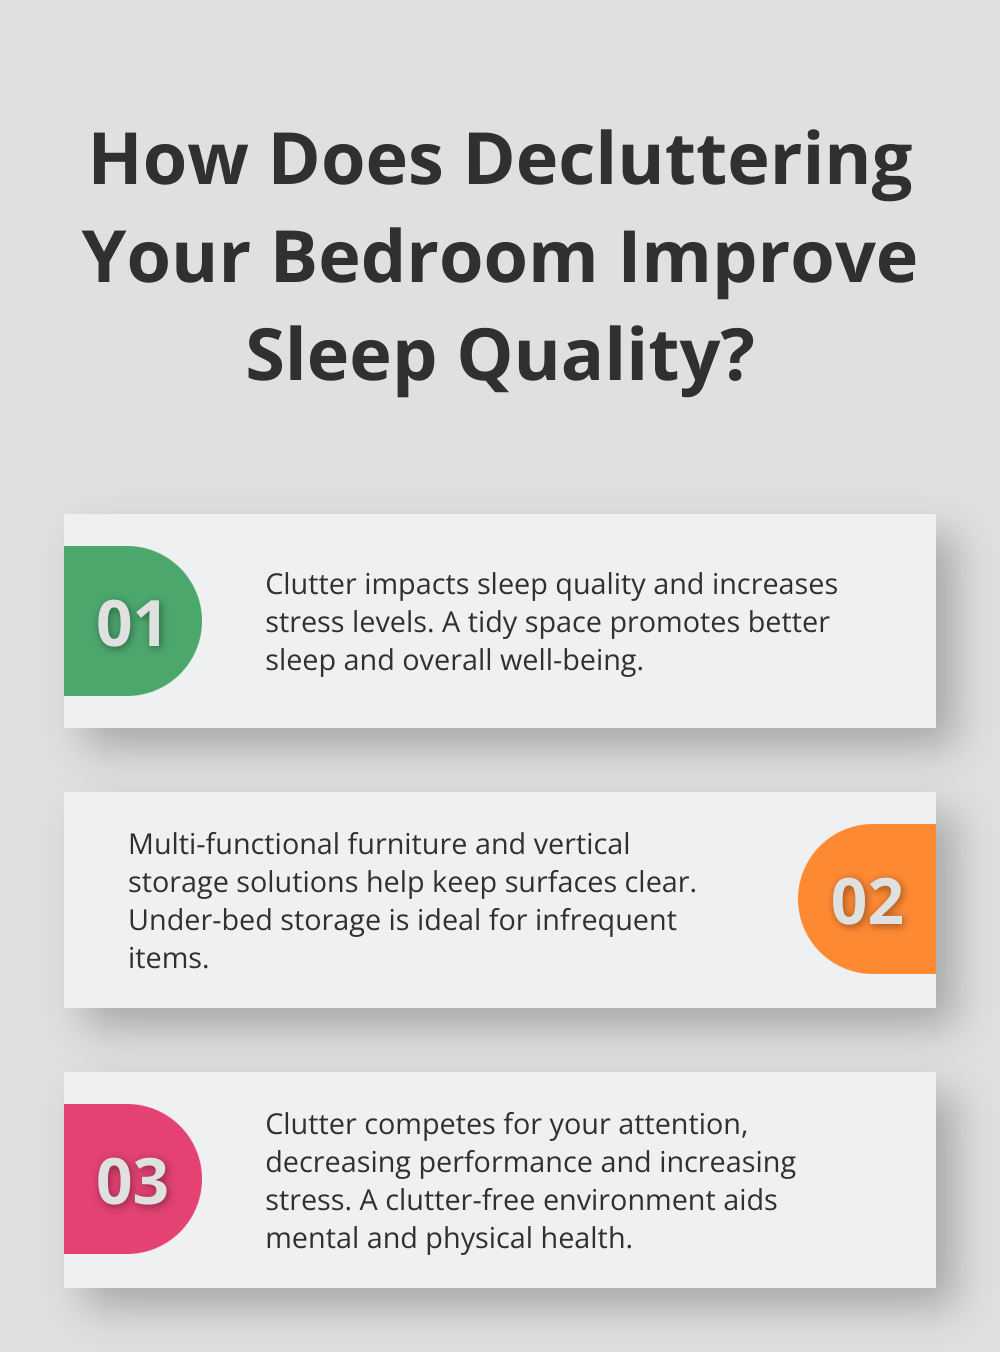 Fact - How Does Decluttering Your Bedroom Improve Sleep Quality?